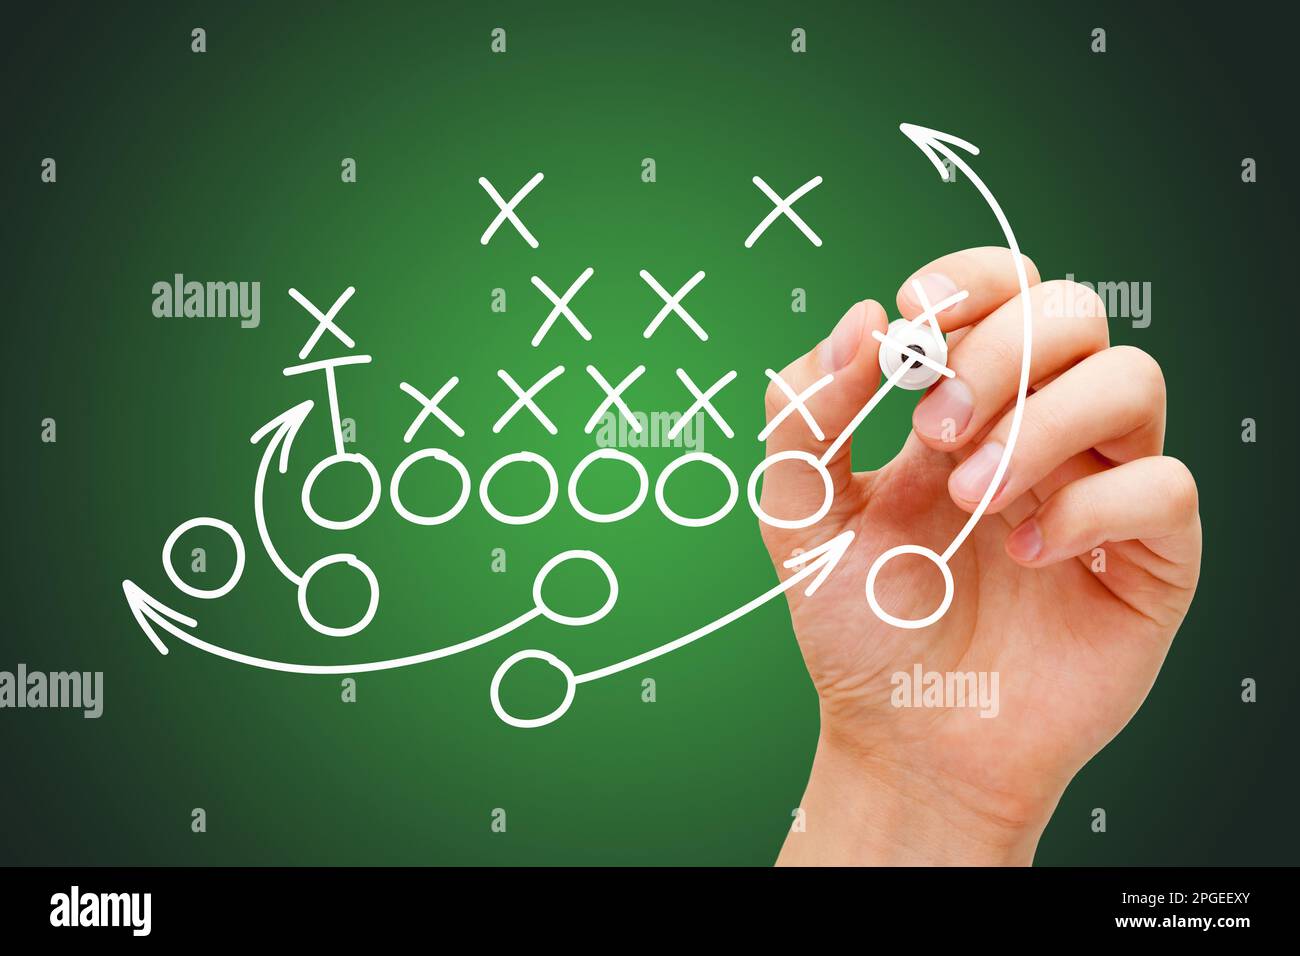 Coach drawing american football or rugby game playbook, strategy and tactics plan in the locker room in front of dark green background. Stock Photo